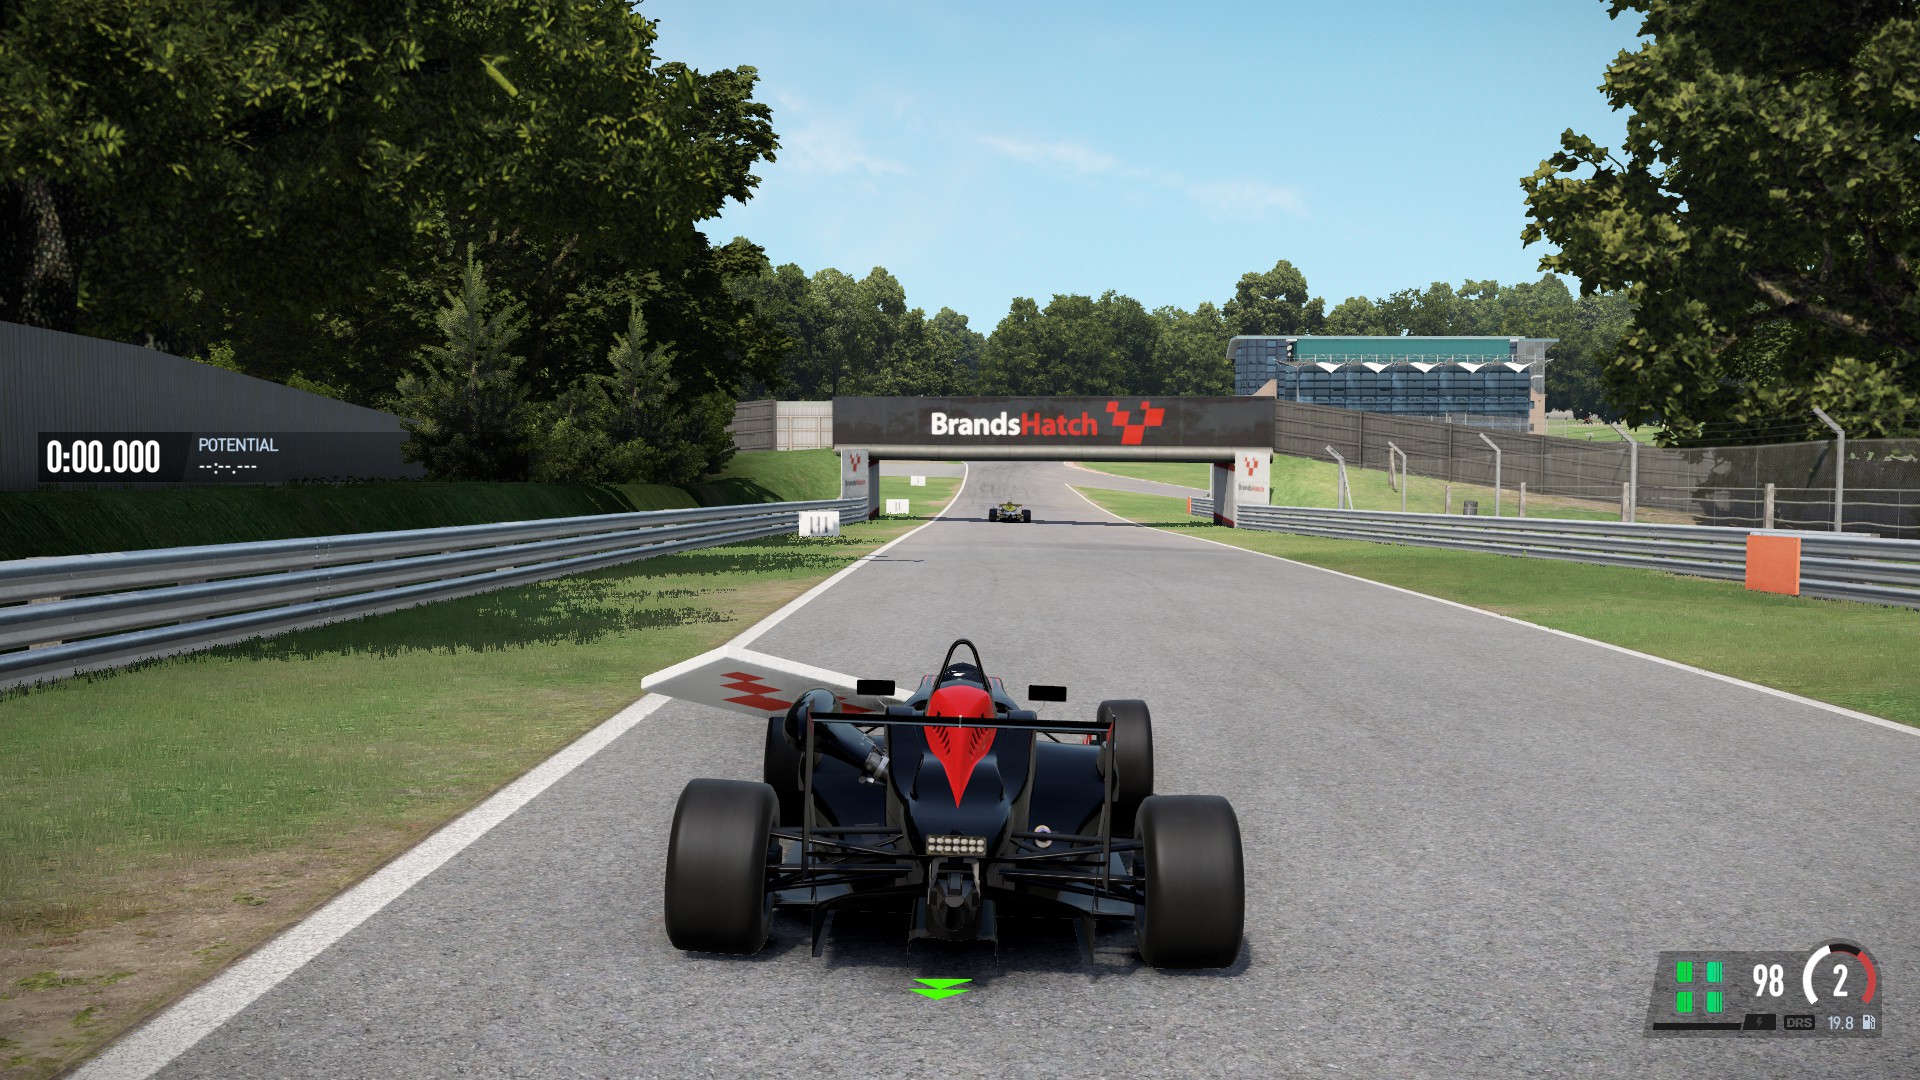 Automobilista 2 V1.0.2.5 Update Released - Now Updated to 